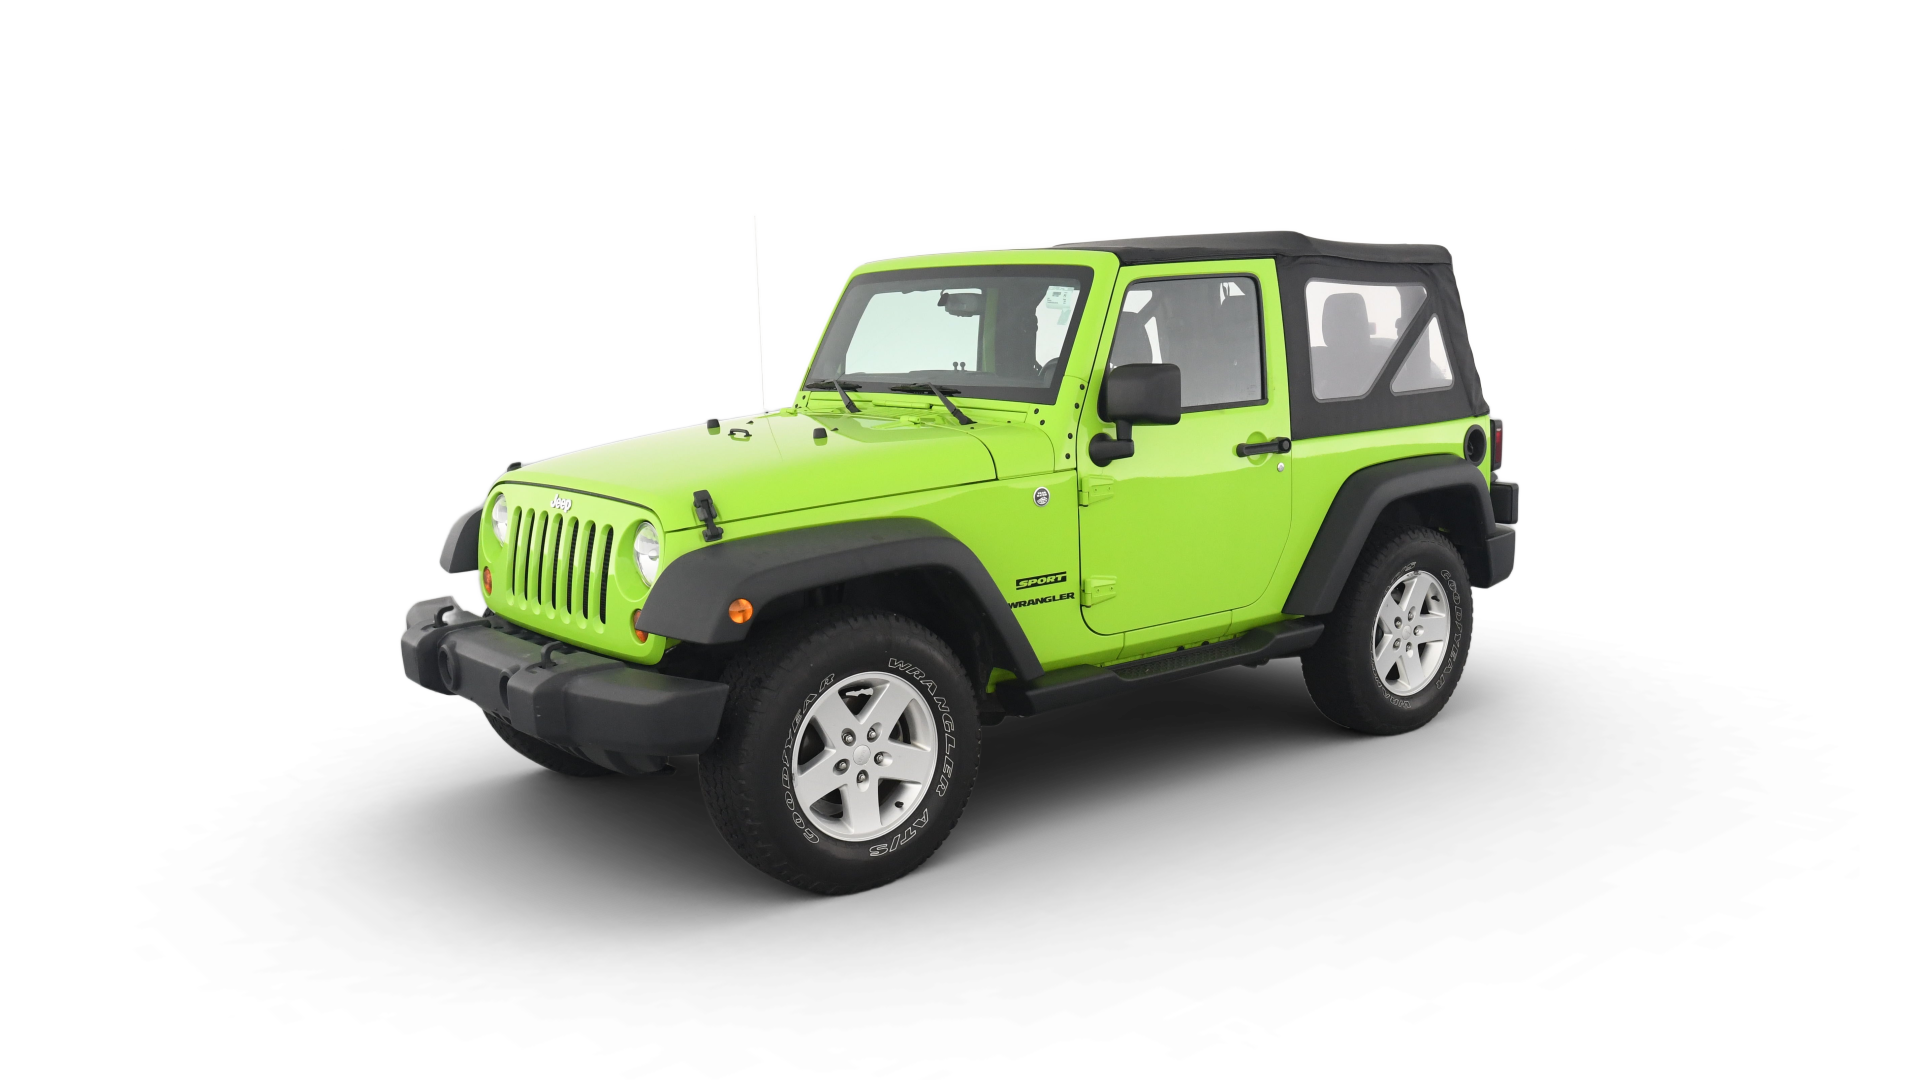 Used 2013 Gray & Green Jeep For Sale Online | Carvana